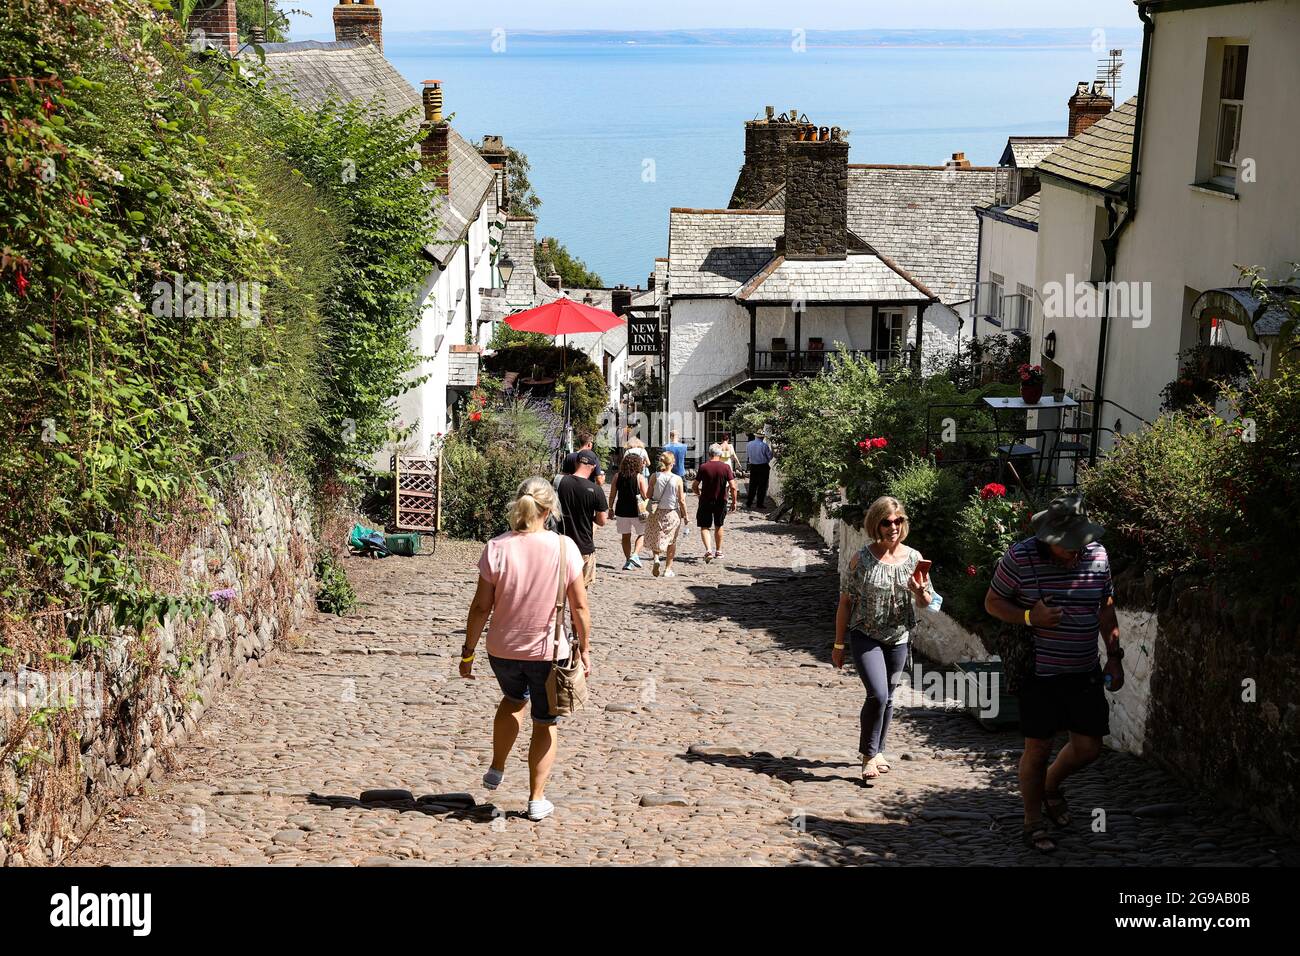 CLOVELLY, DEVON, UK. 22 JULY 2021. A view of Clovelly steps which lead to the Harbour. Stock Photo